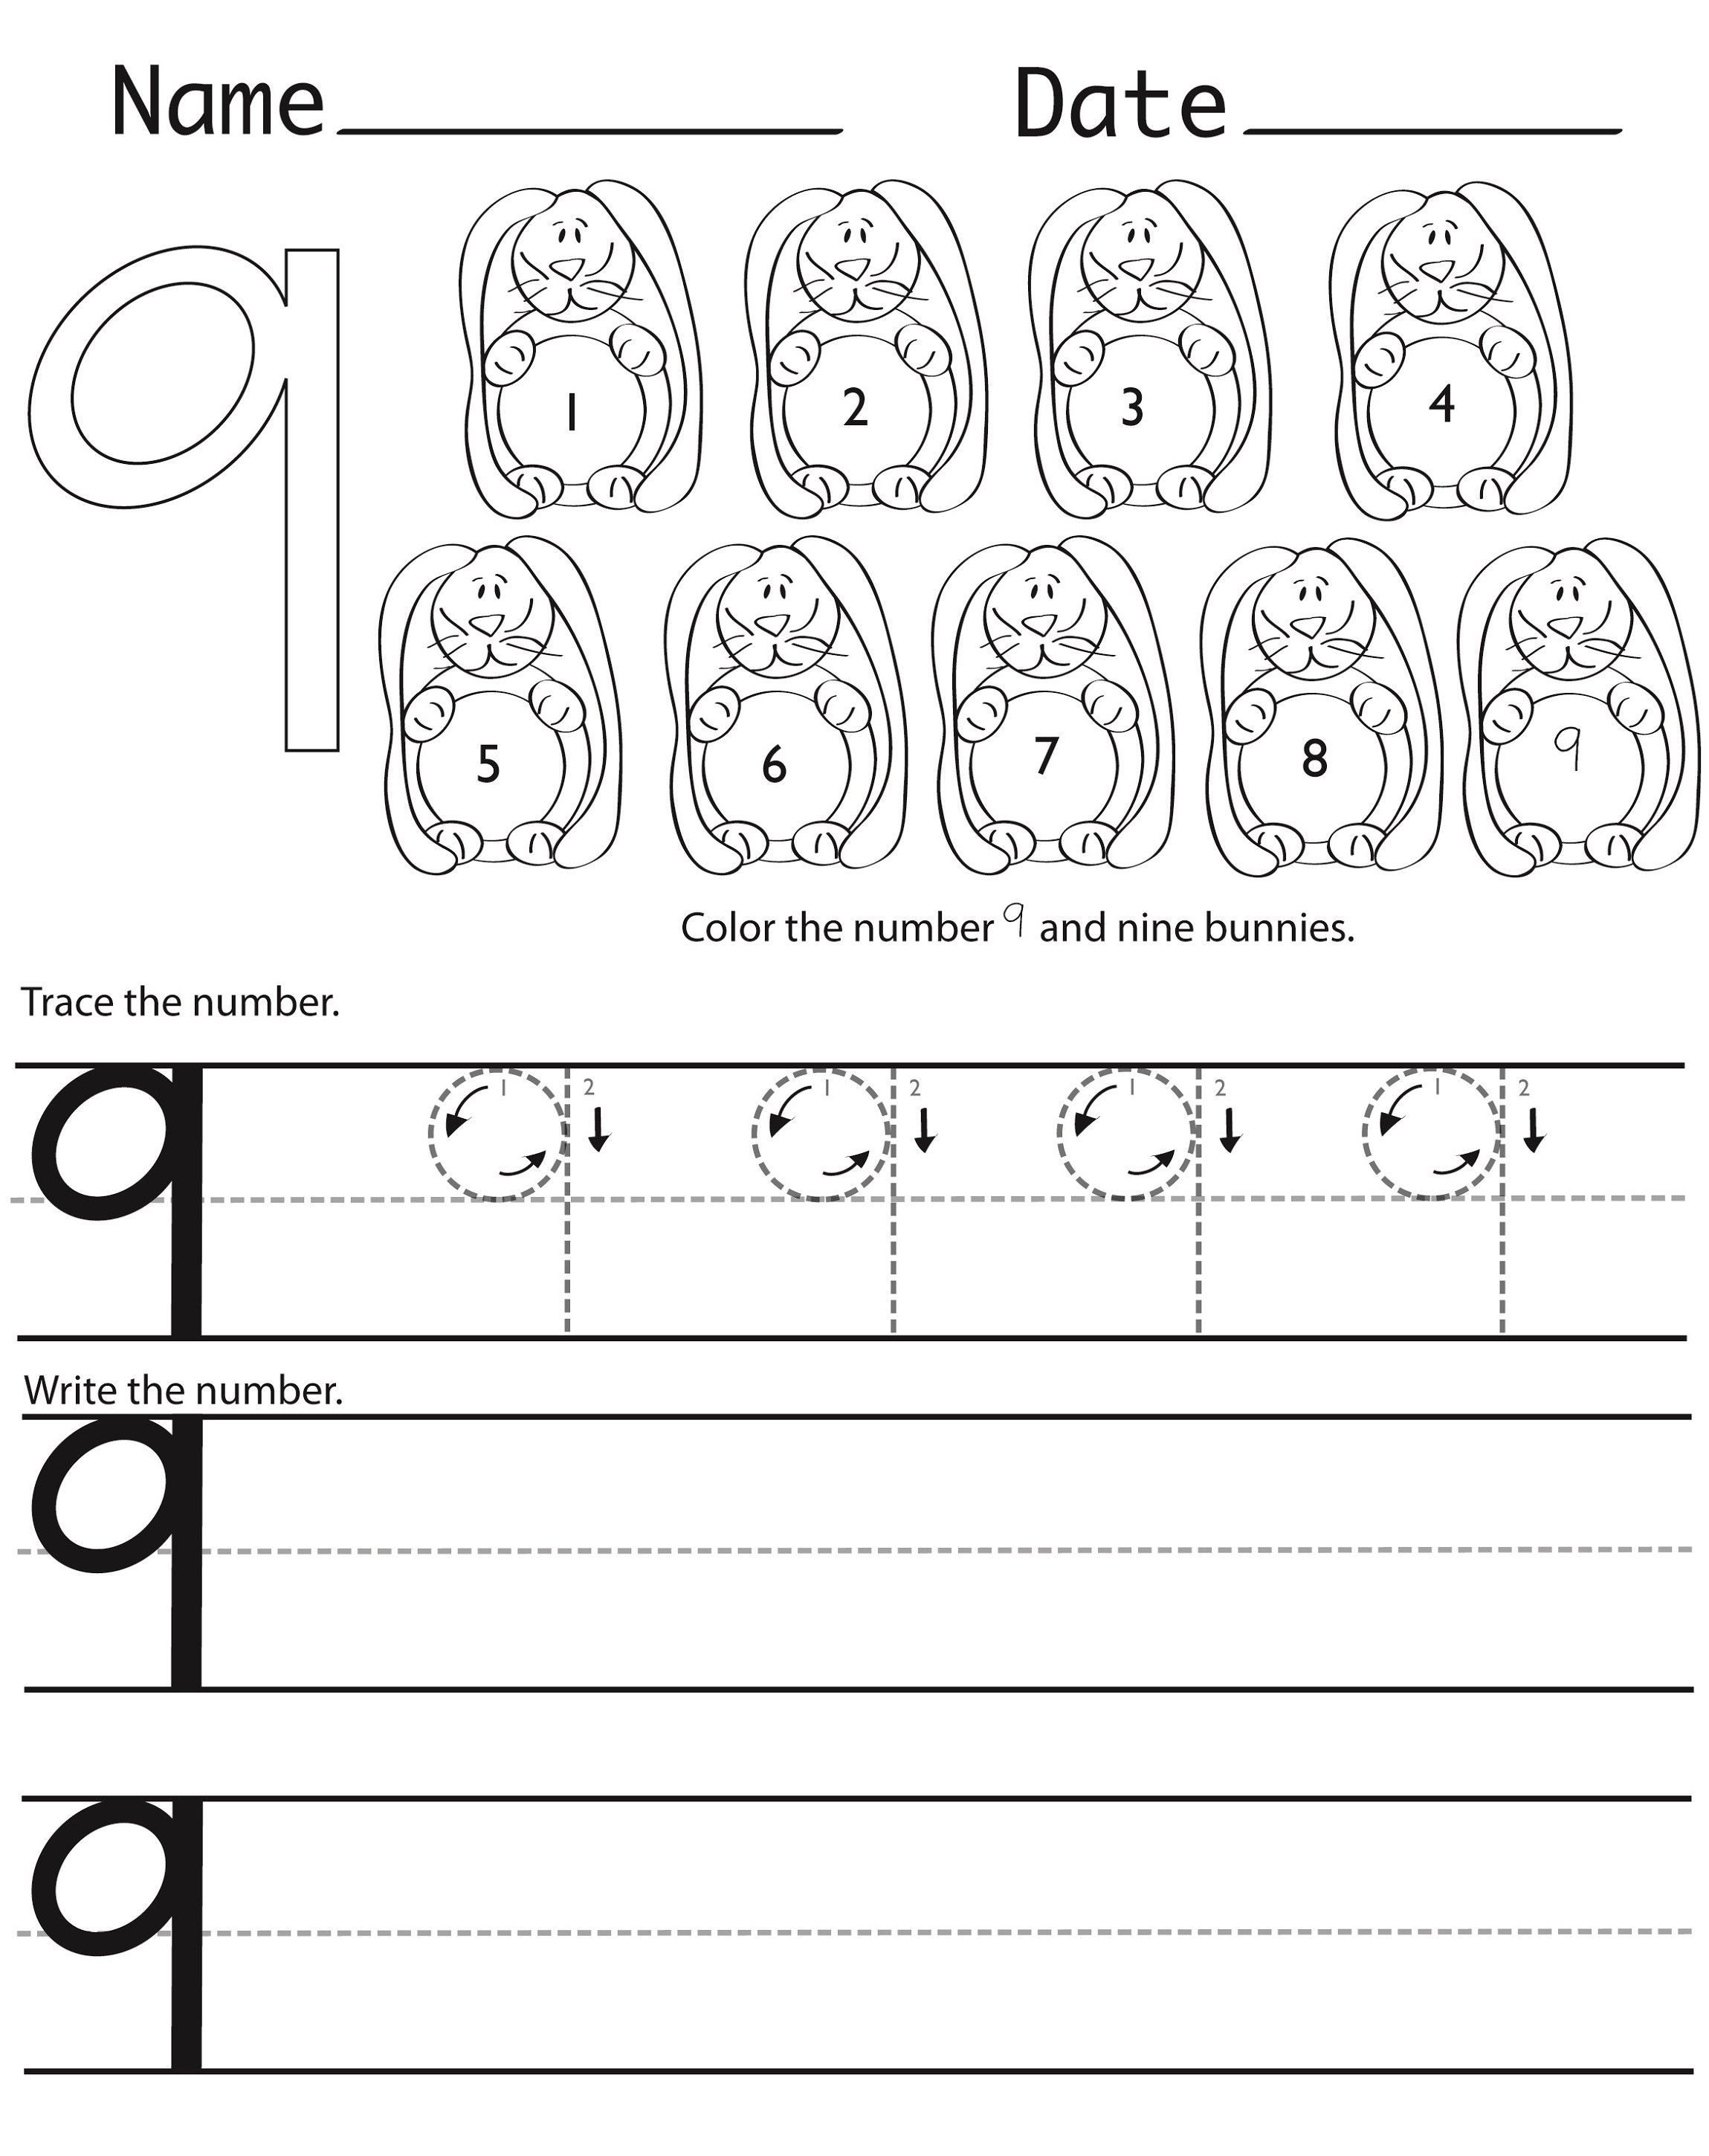 Preschool Coloring Sheets For The N And The Number 9
 Number 9 Worksheets to Print